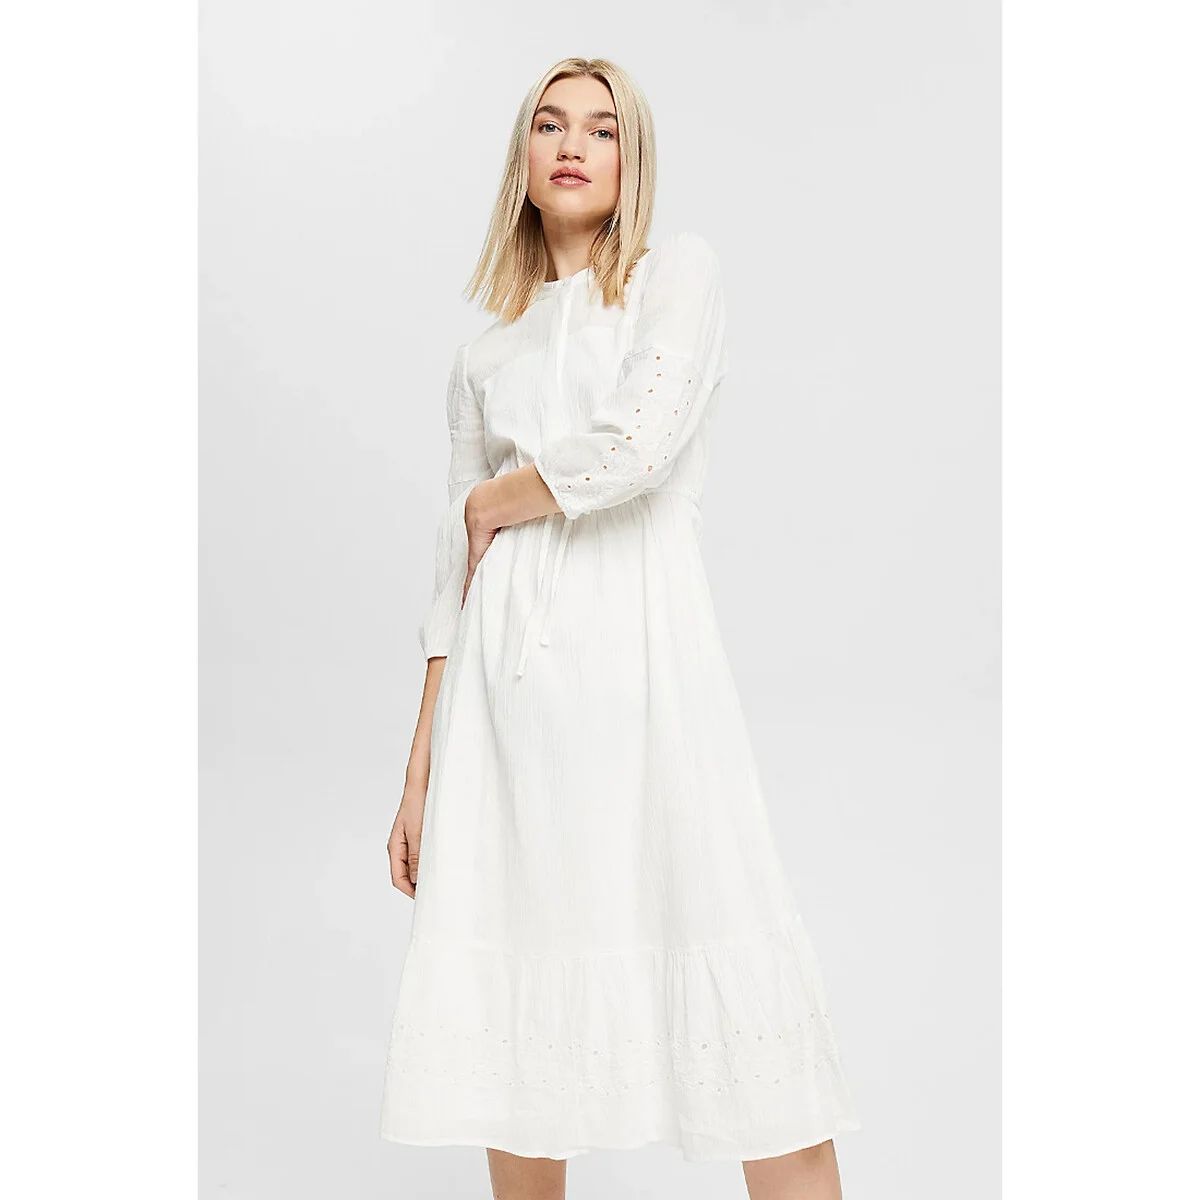 Lace Knee-Length Dress in Cotton with High Neck | La Redoute (UK)